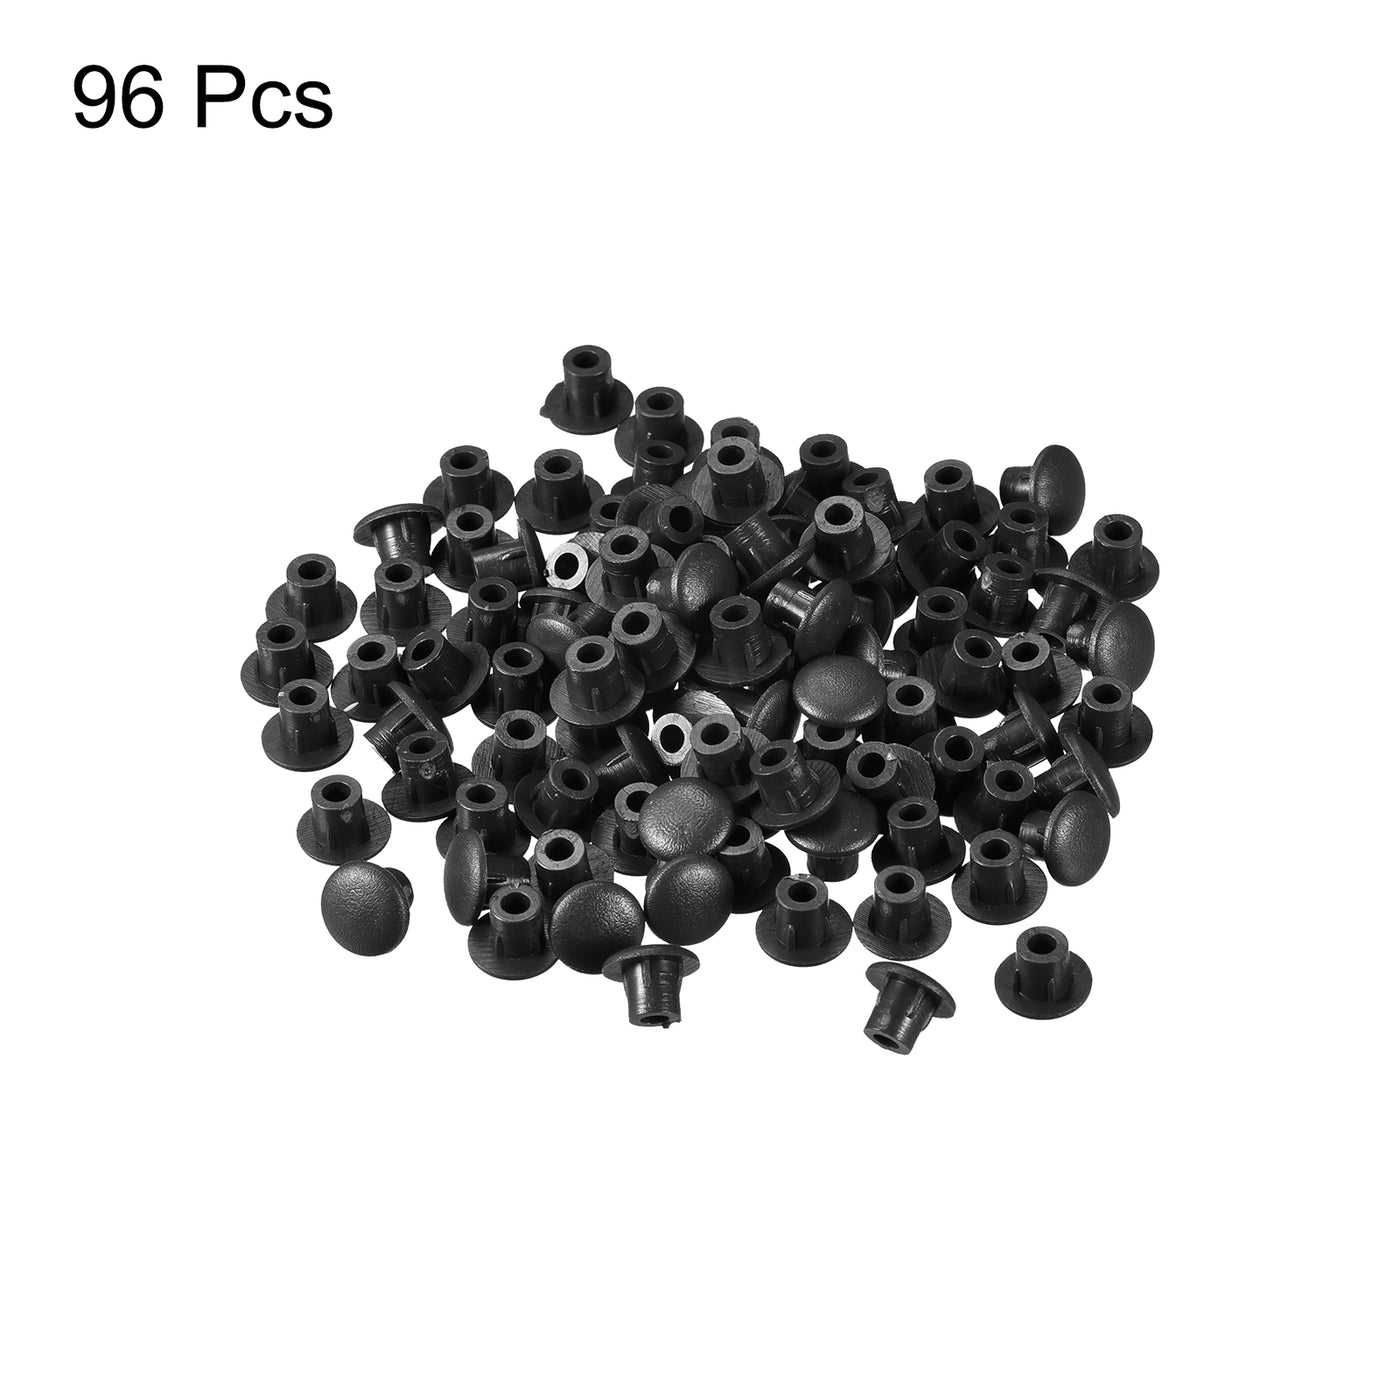 uxcell Uxcell Screw Hole Plugs, 5mm(3/16") Dia PP Snap in Shelf Button Flush Type Caps for Furniture Cabinet Cupboard, Black 96 Pcs